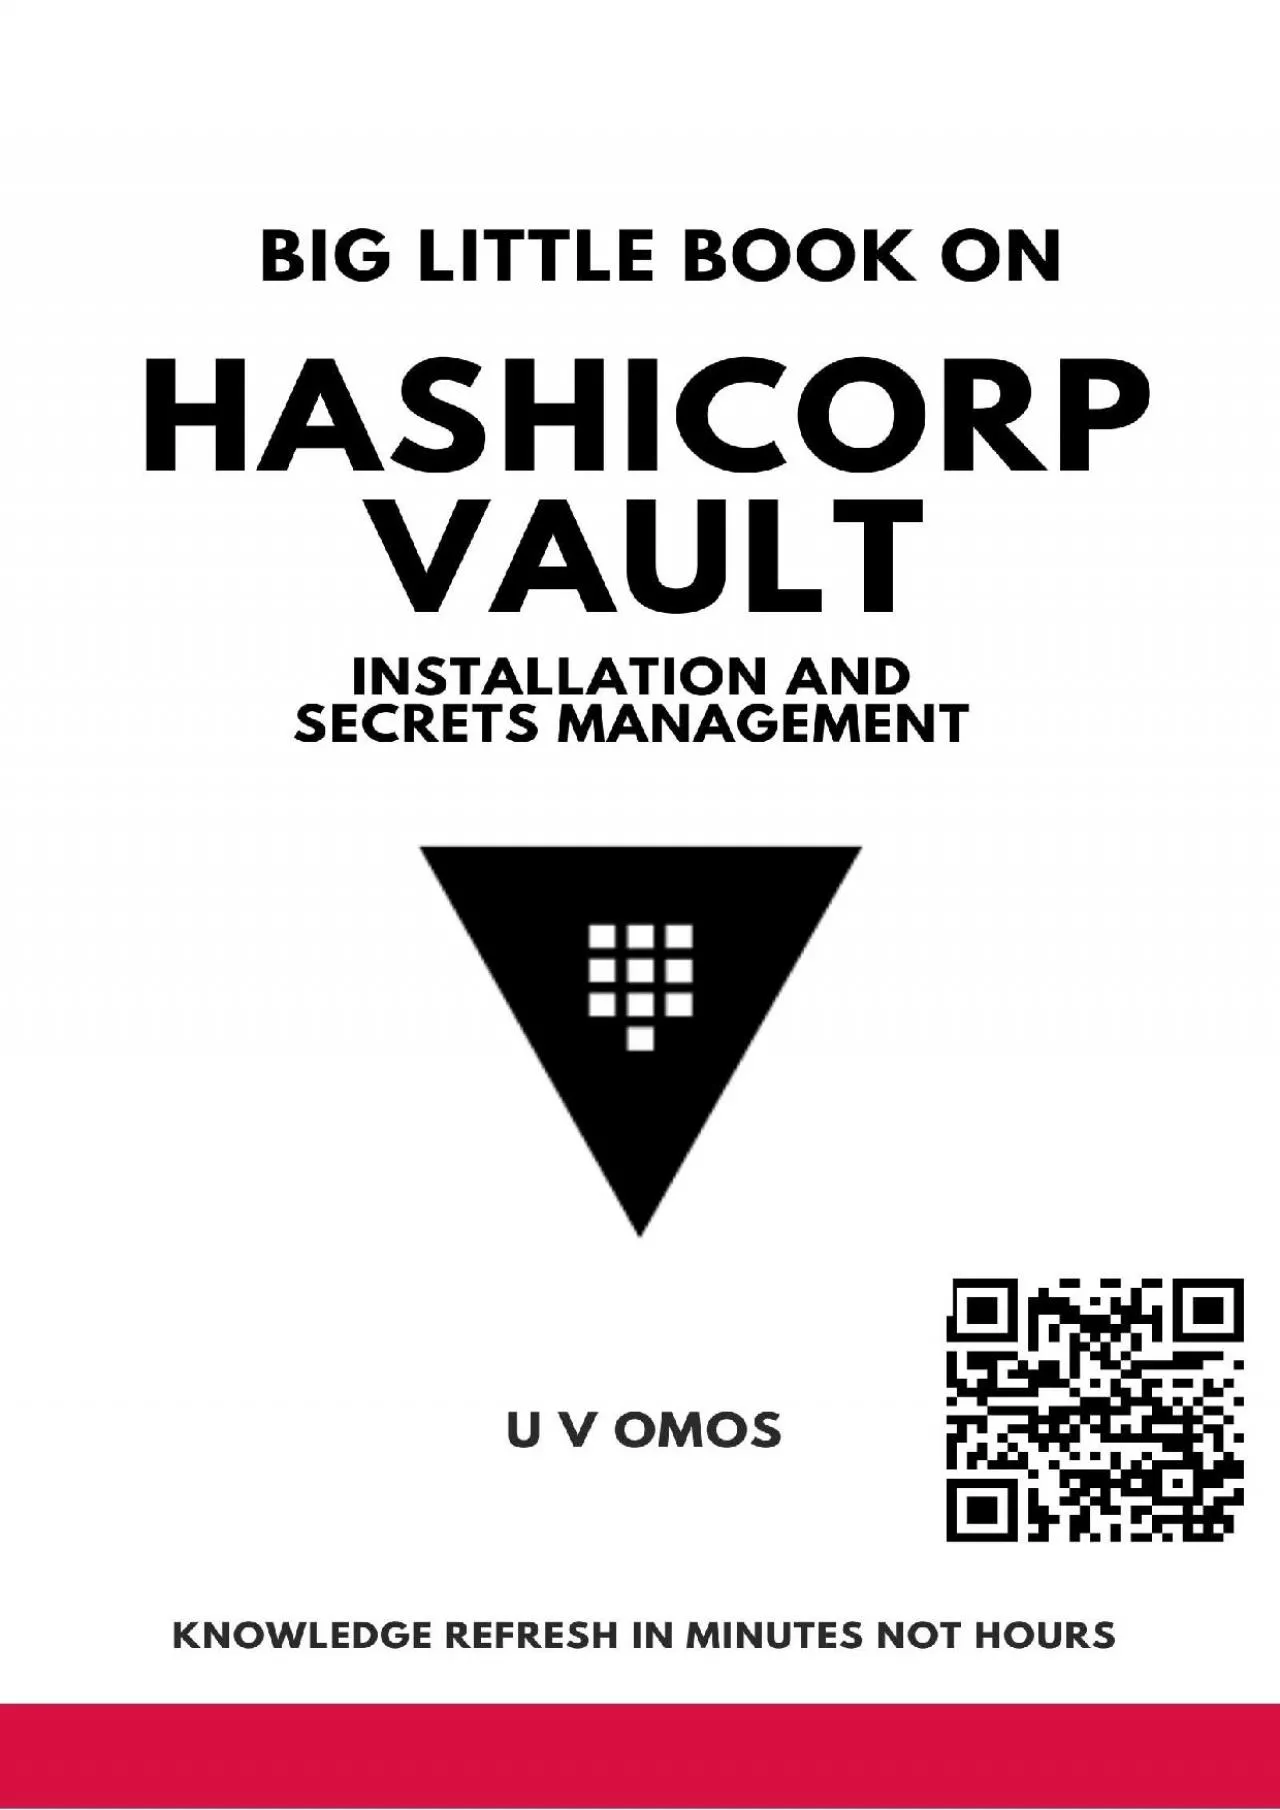 (DOWNLOAD)-Big Little Book on Hashicorp Vault: Hashicorp Vault installation and secrets